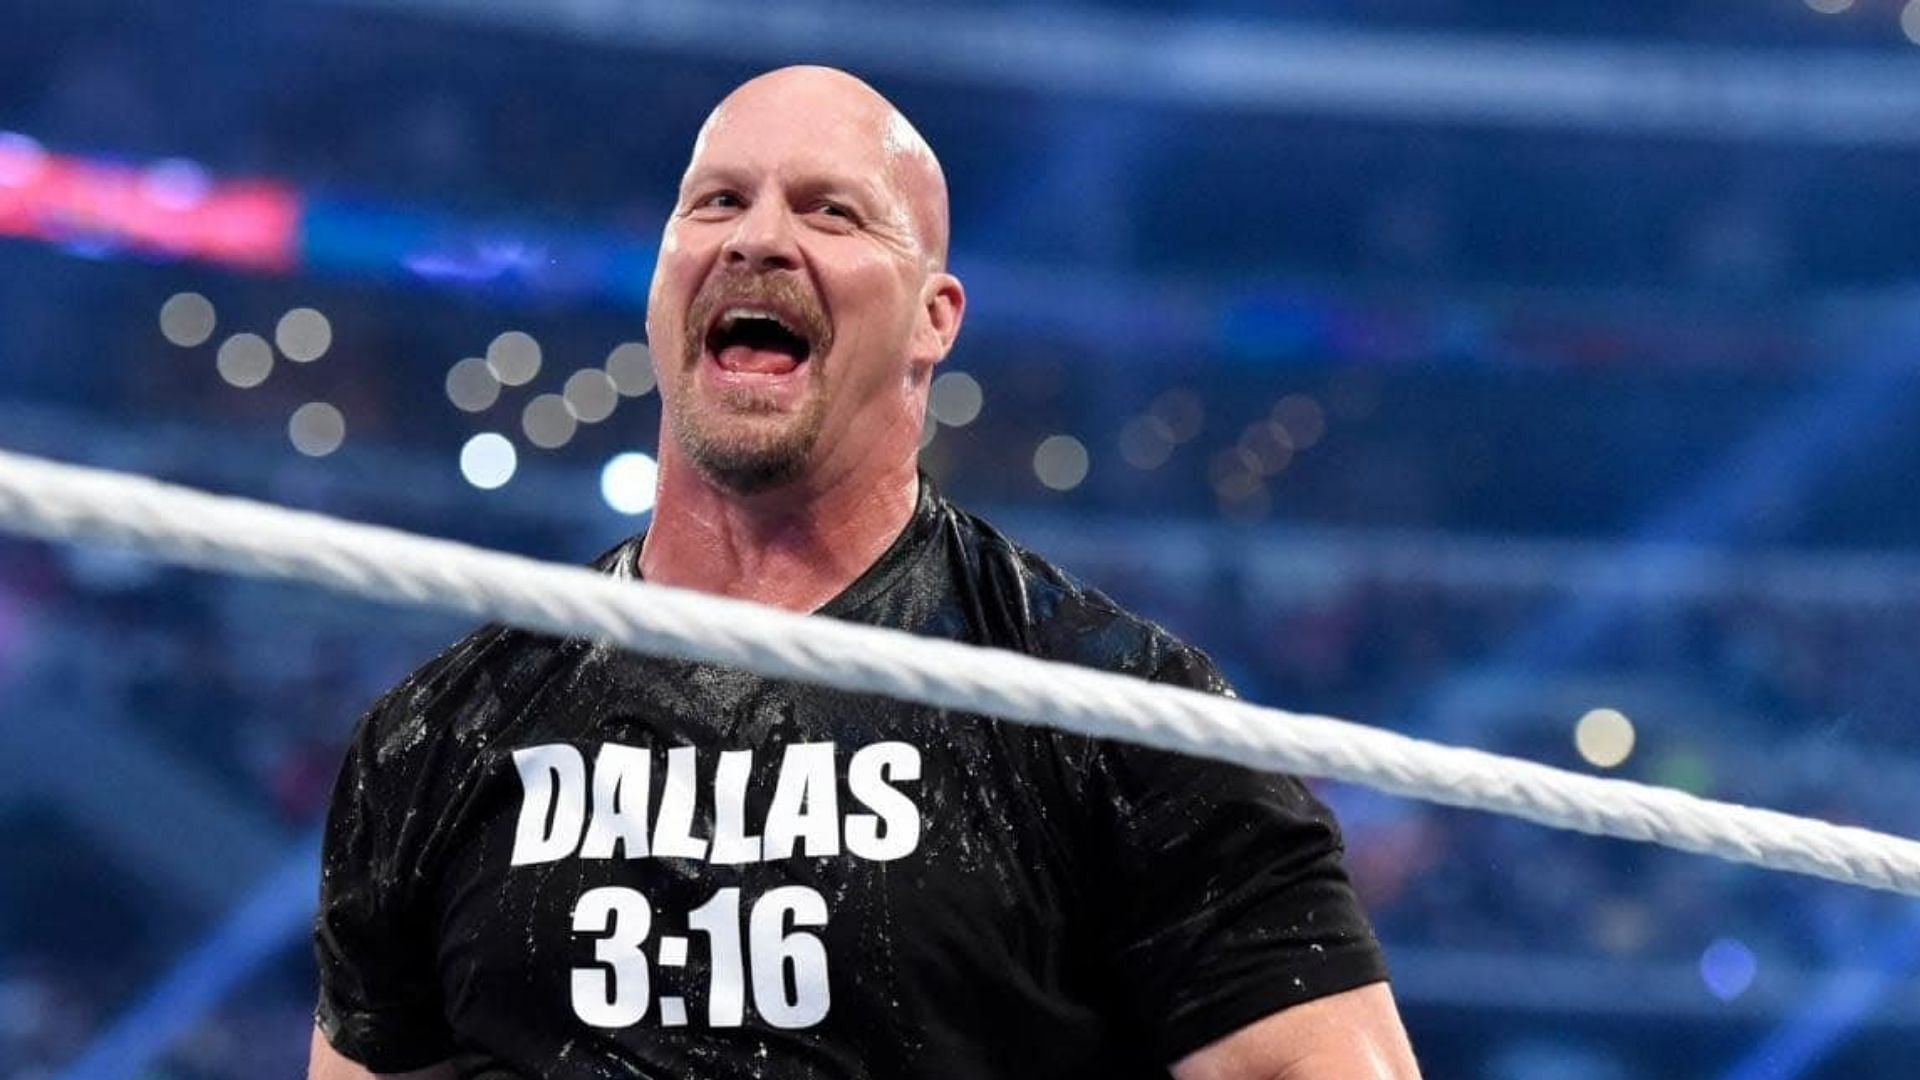 Stone Cold returned to the ring at WrestleMania 38